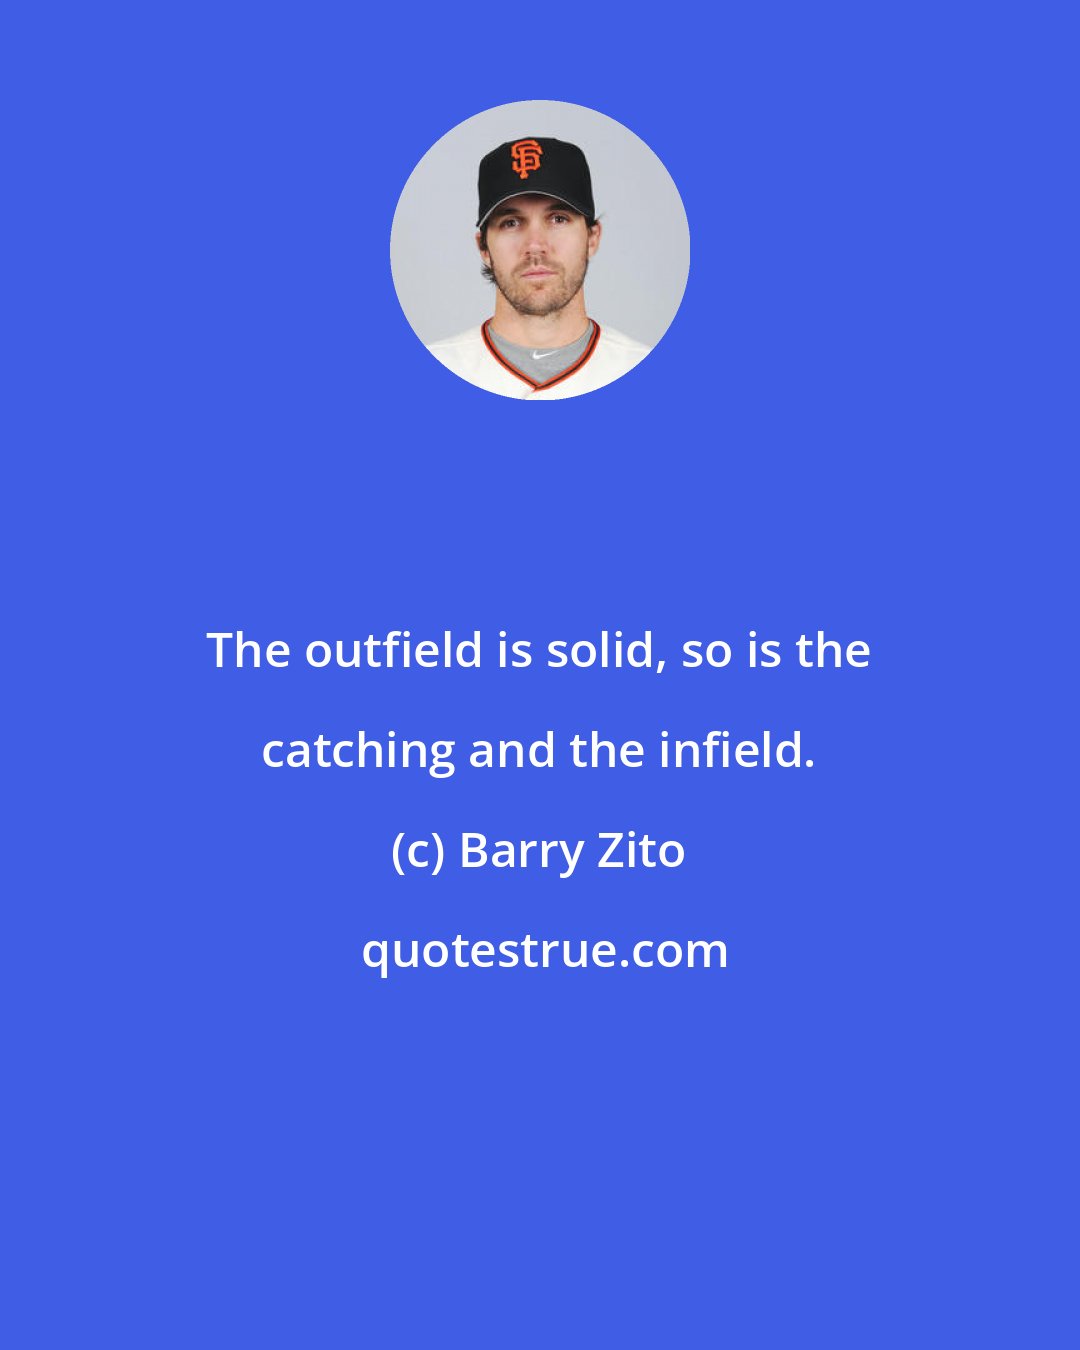 Barry Zito: The outfield is solid, so is the catching and the infield.